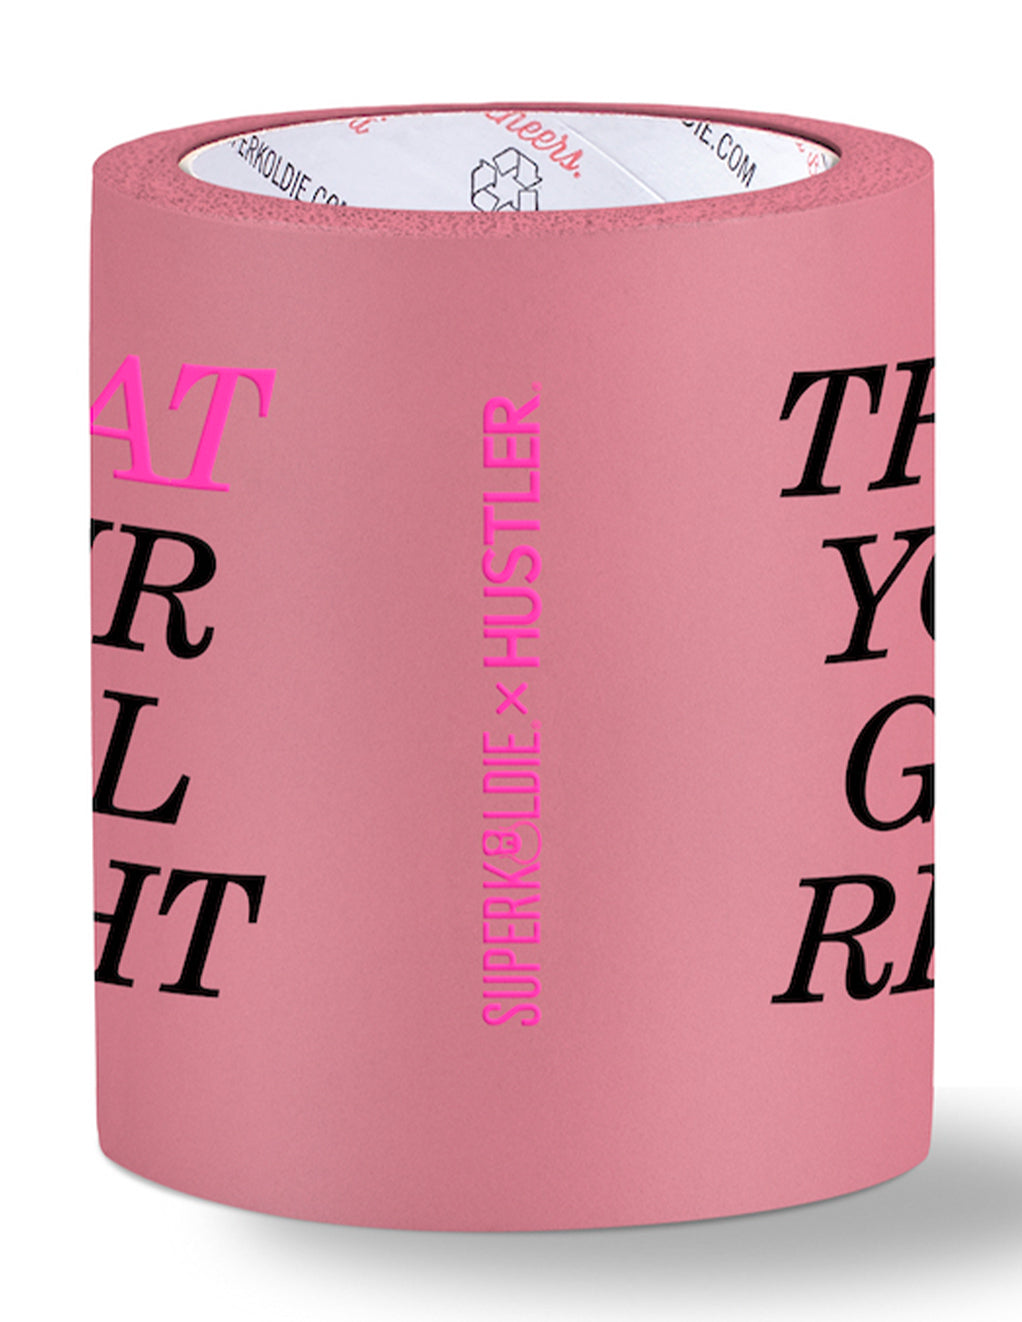 Superkoldie x HUSTLER Treat Your Girl Right Can Cooler- Logo side